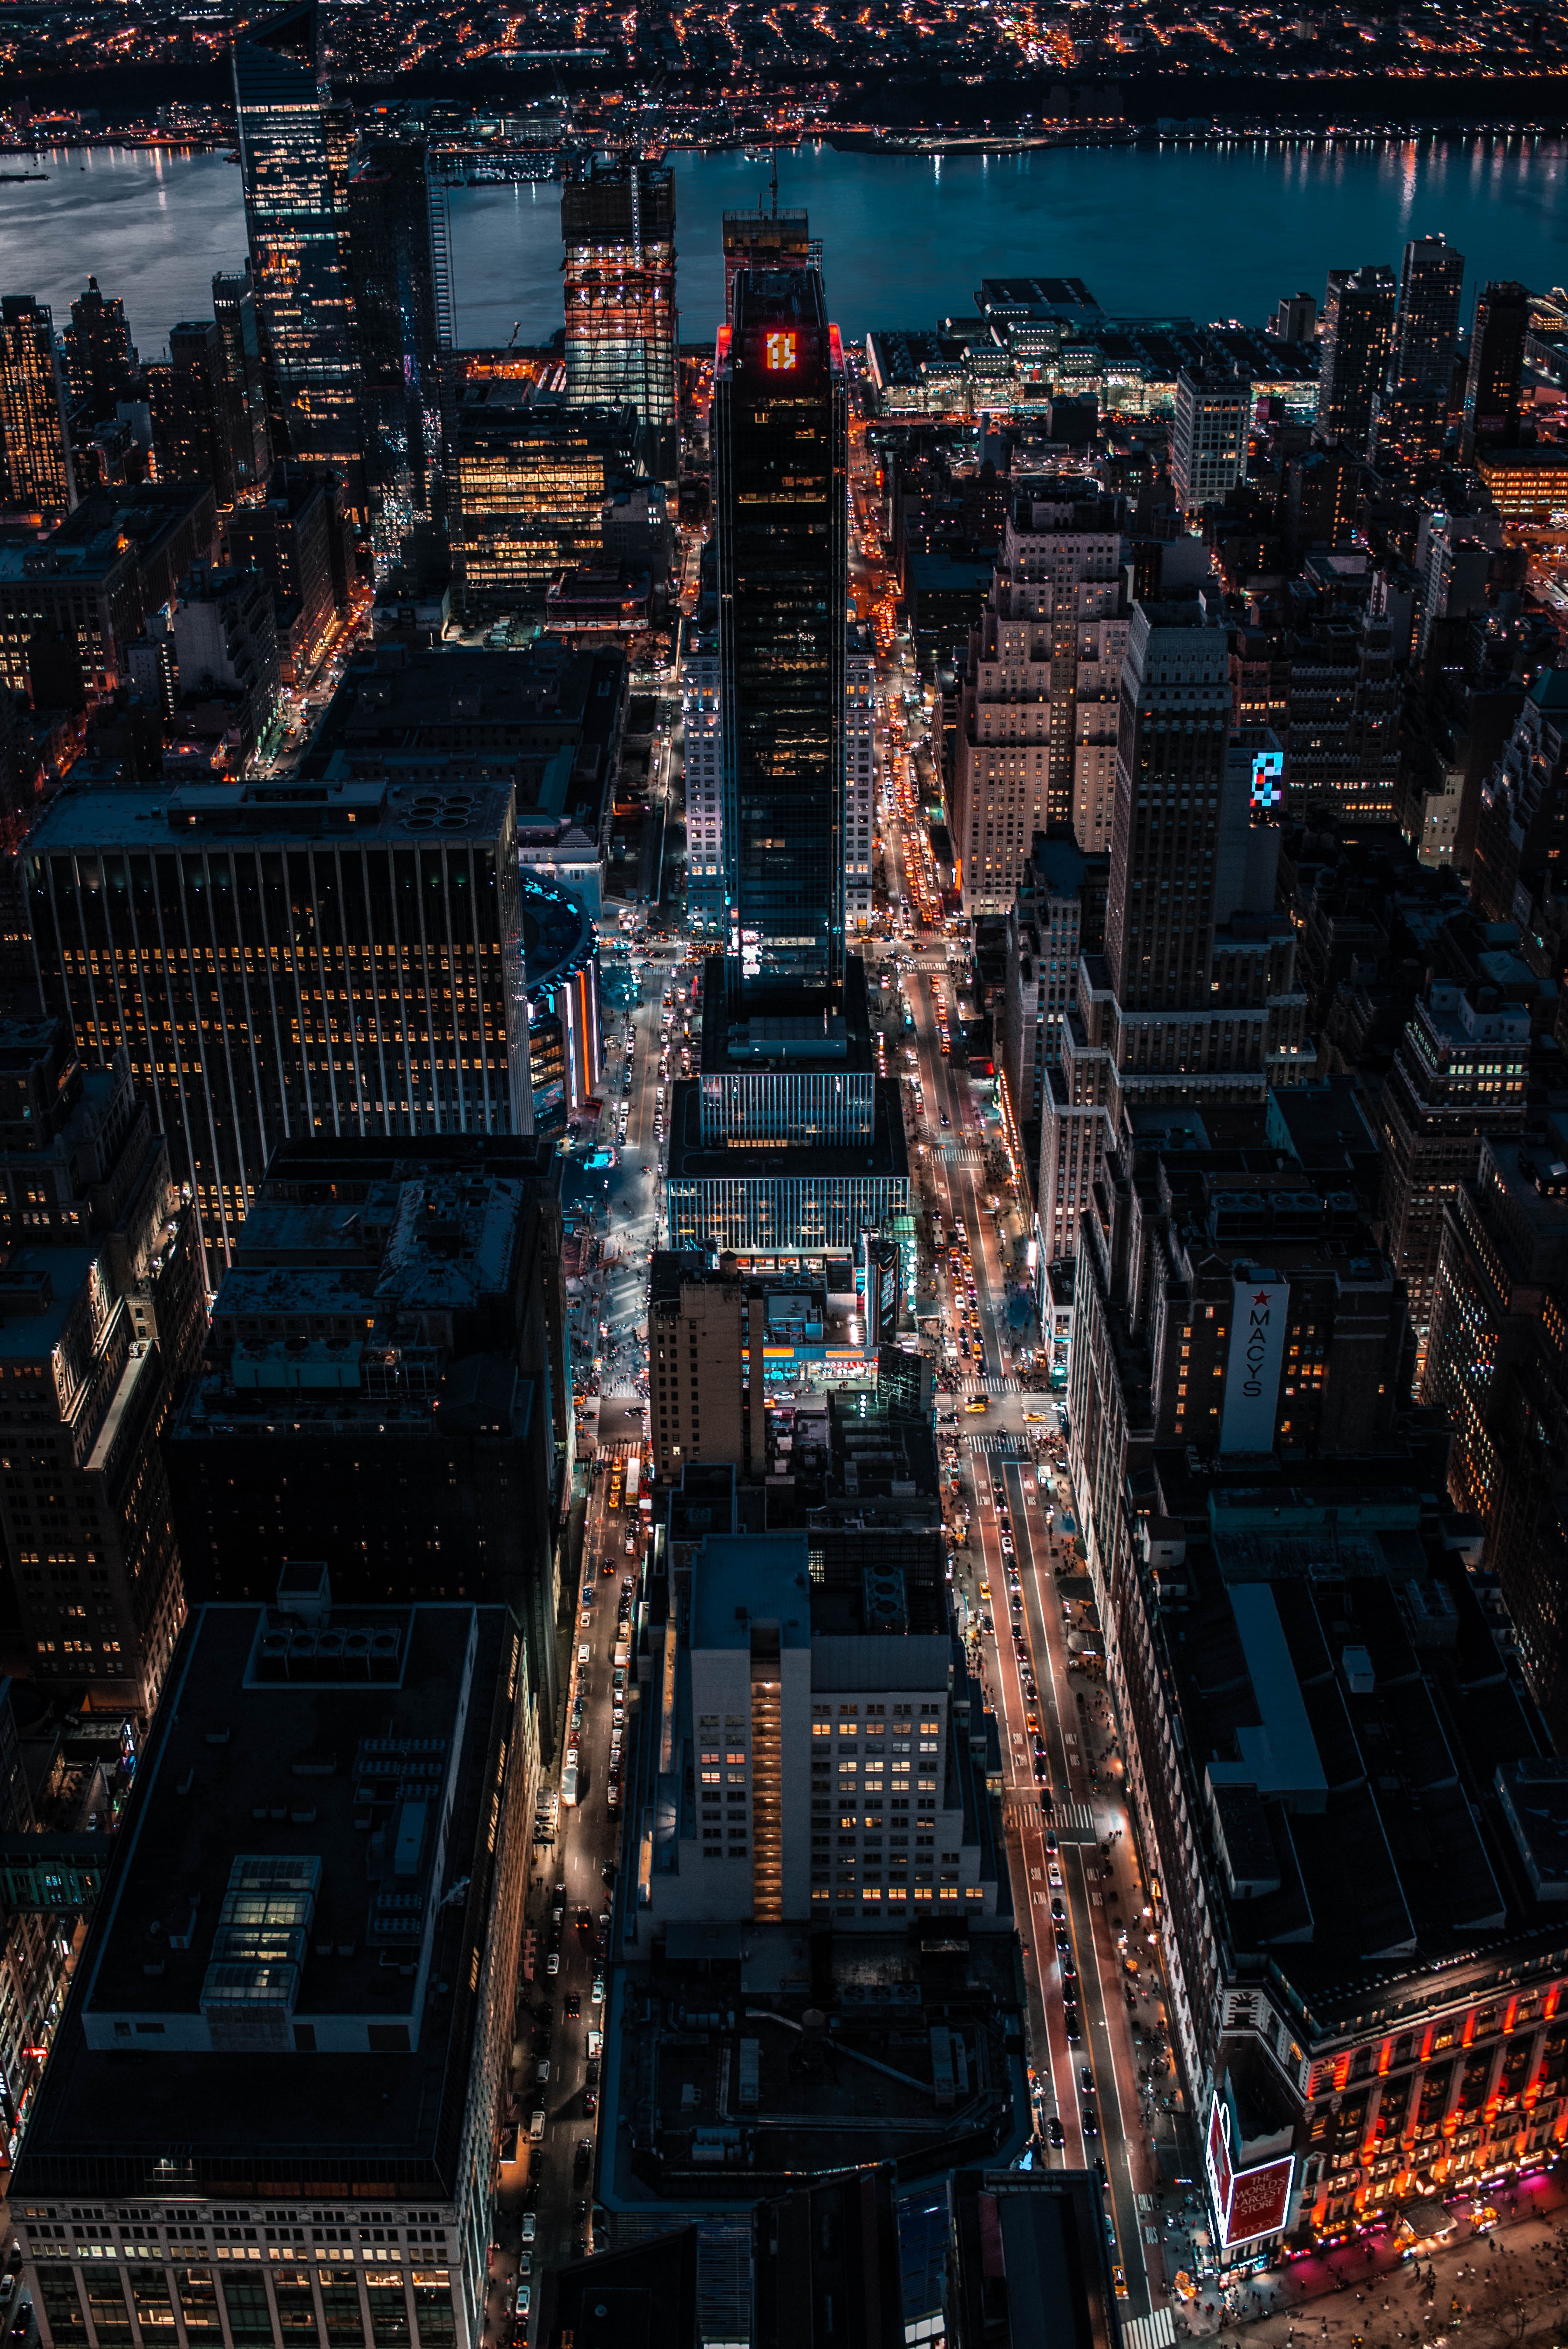 city lights, megapolis, megalopolis, view from above, cities, building, night city, skyscrapers lock screen backgrounds